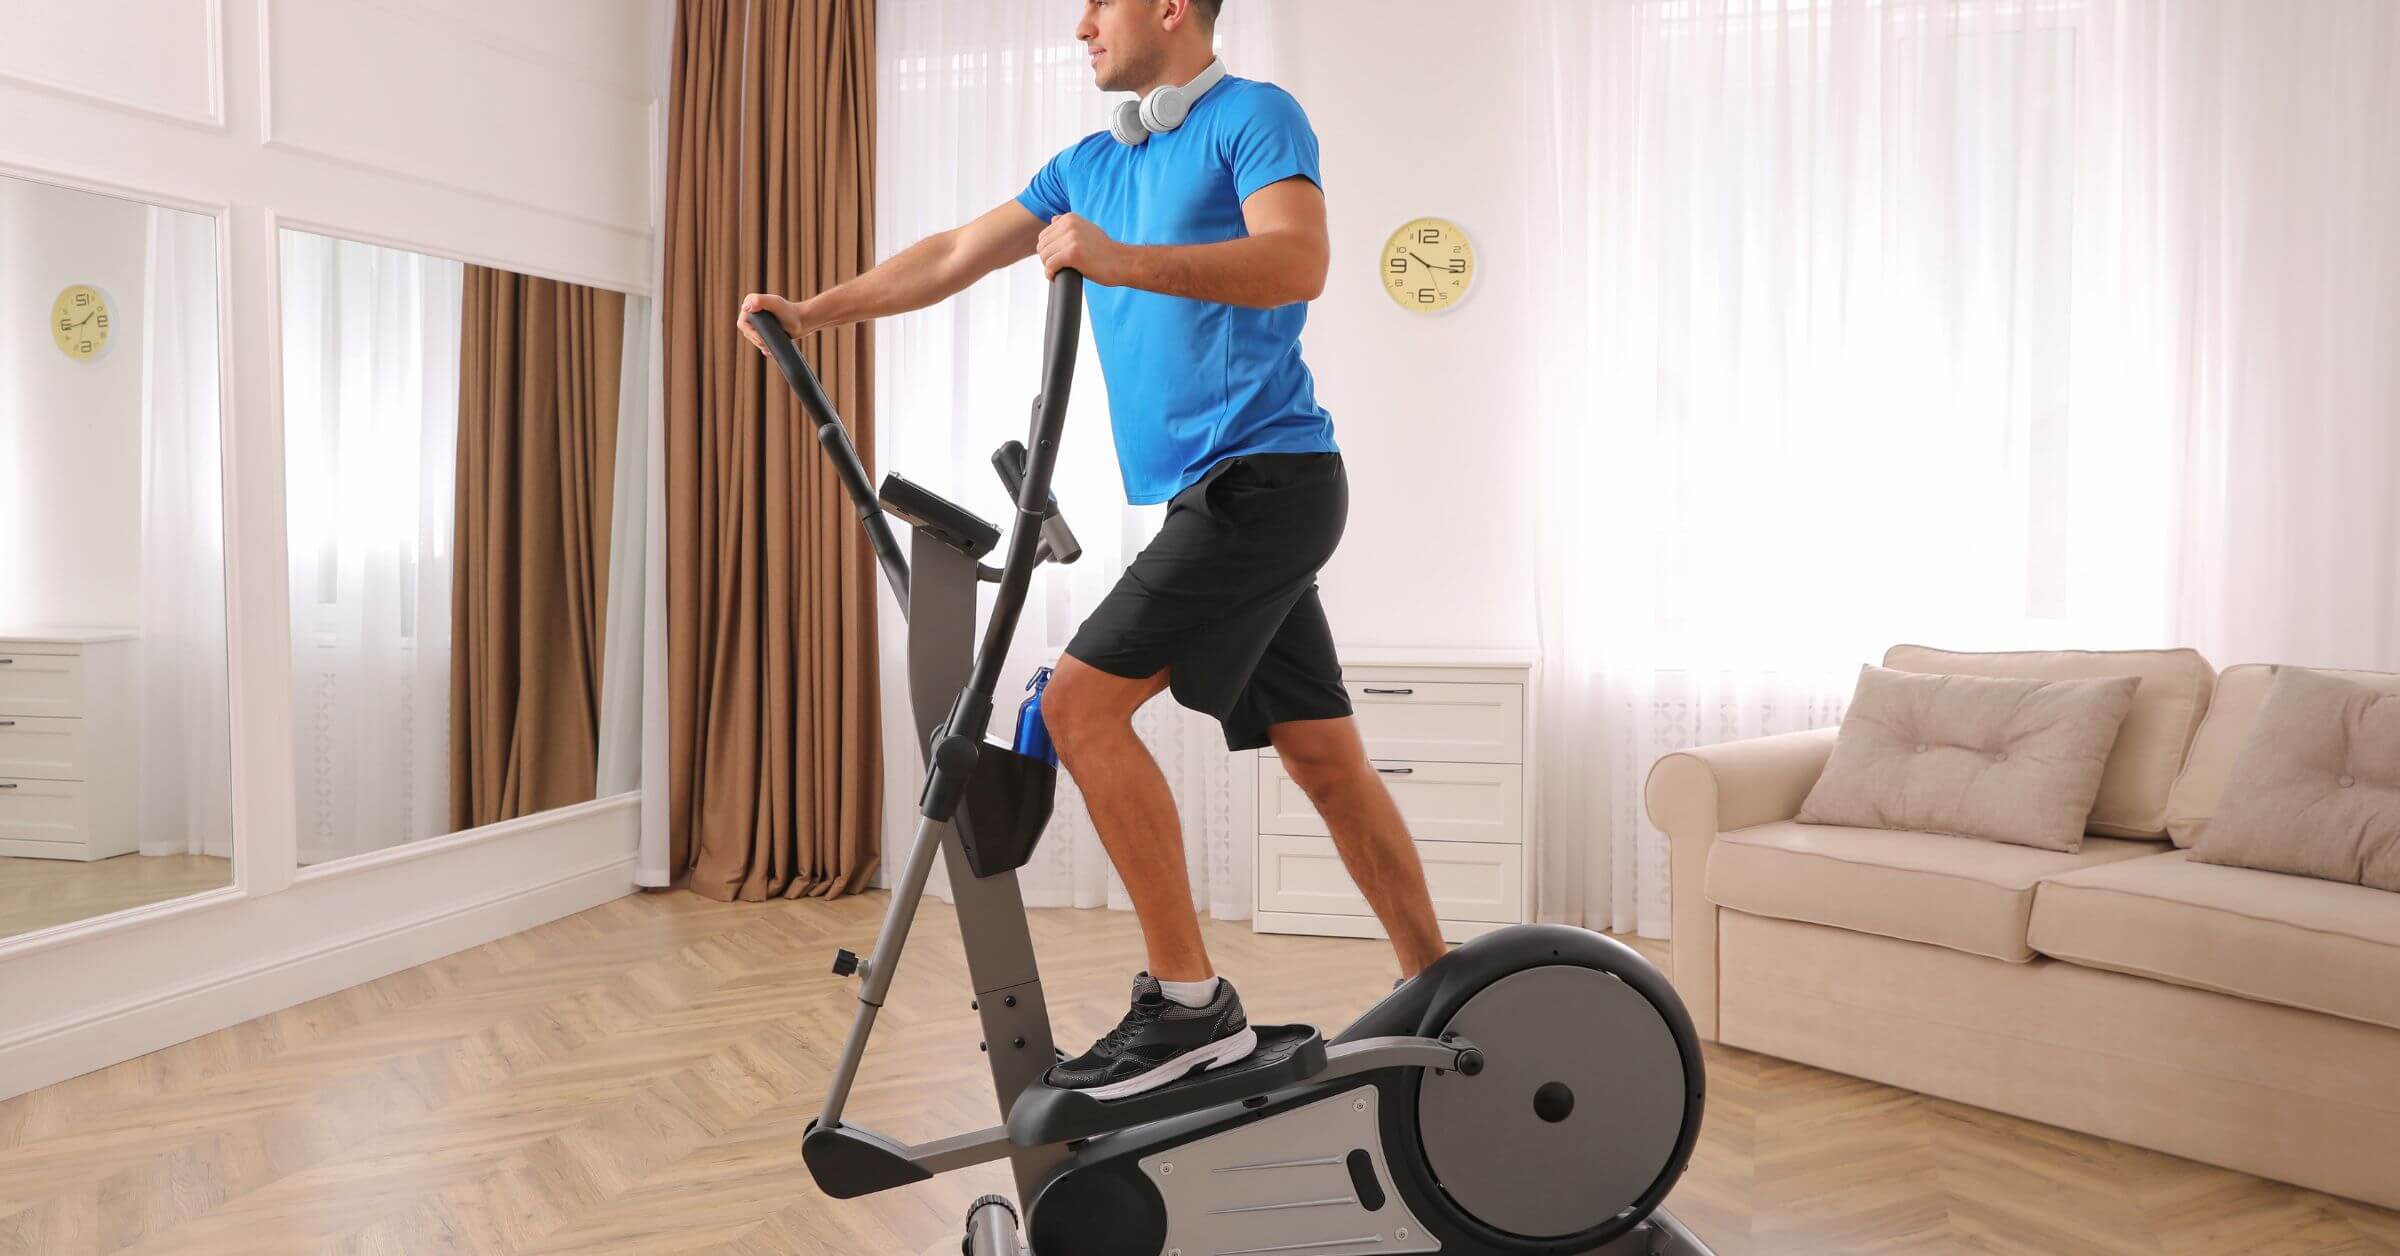 Ellipticals can help runners improve their muscles